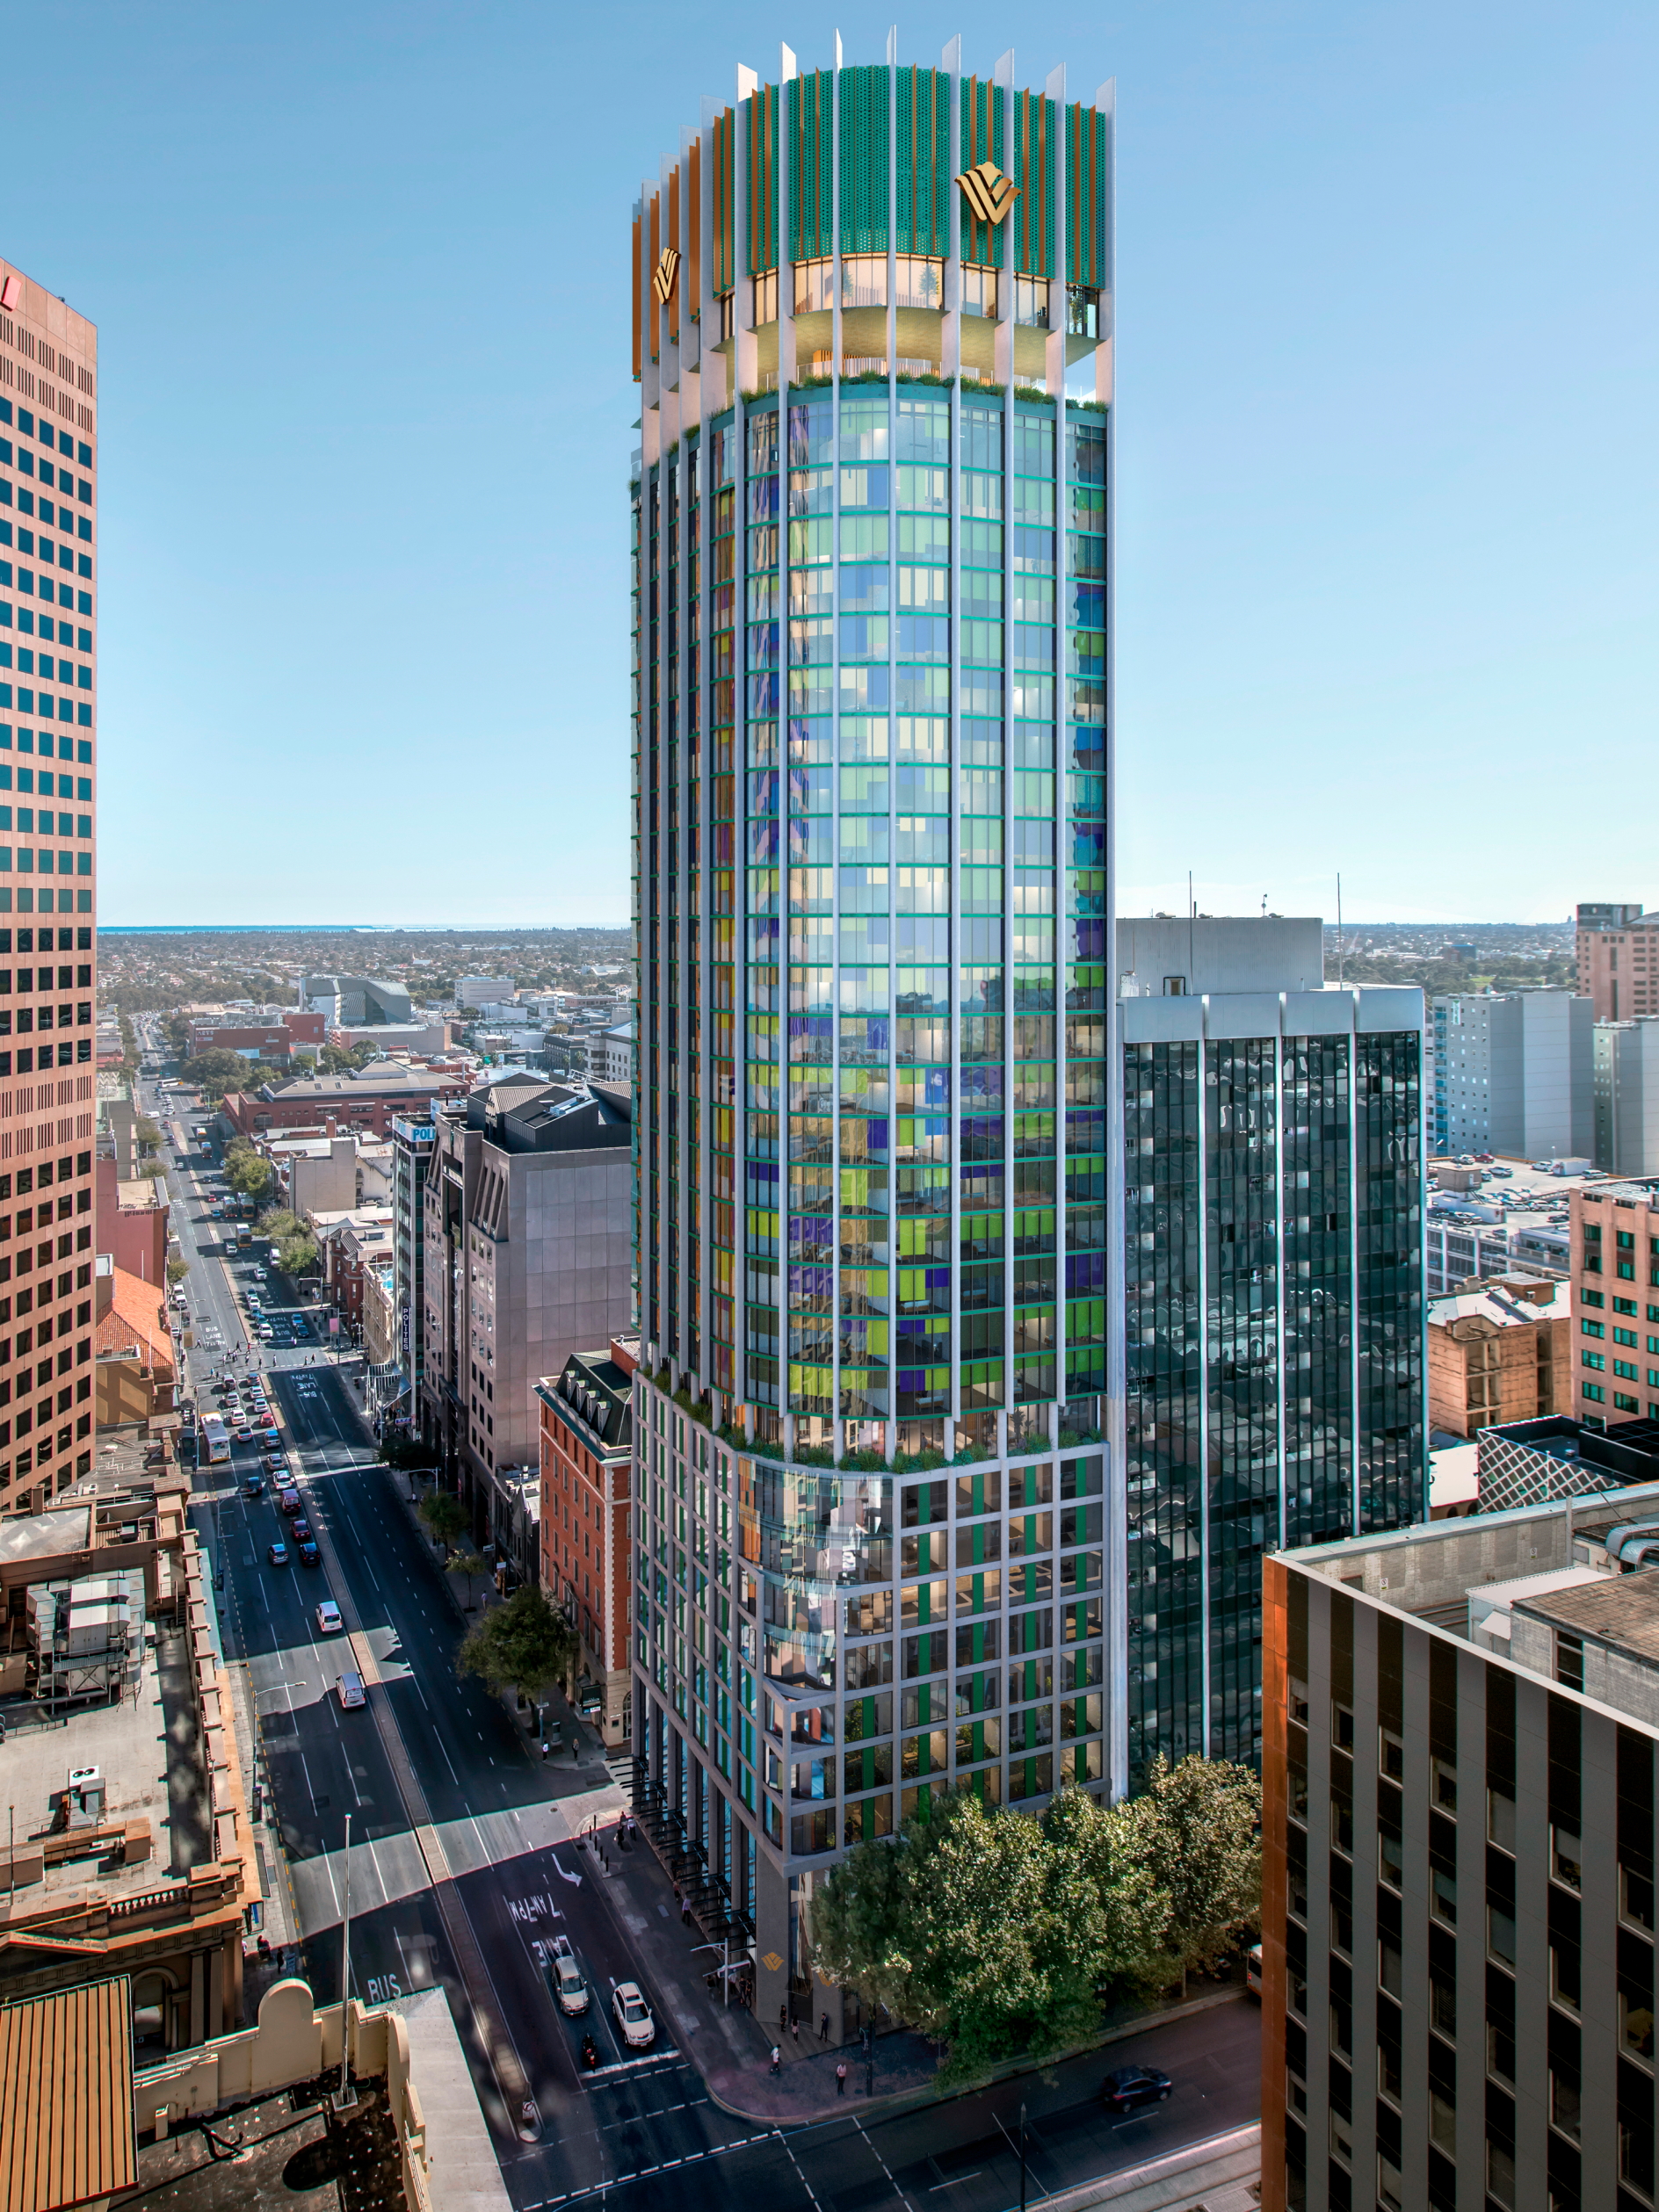 The Wyndham Grand Adelaide will rise 120 meters from King William Street in Adelaide’s Central Business District, becoming a new icon for the city.. Click to enlarge.